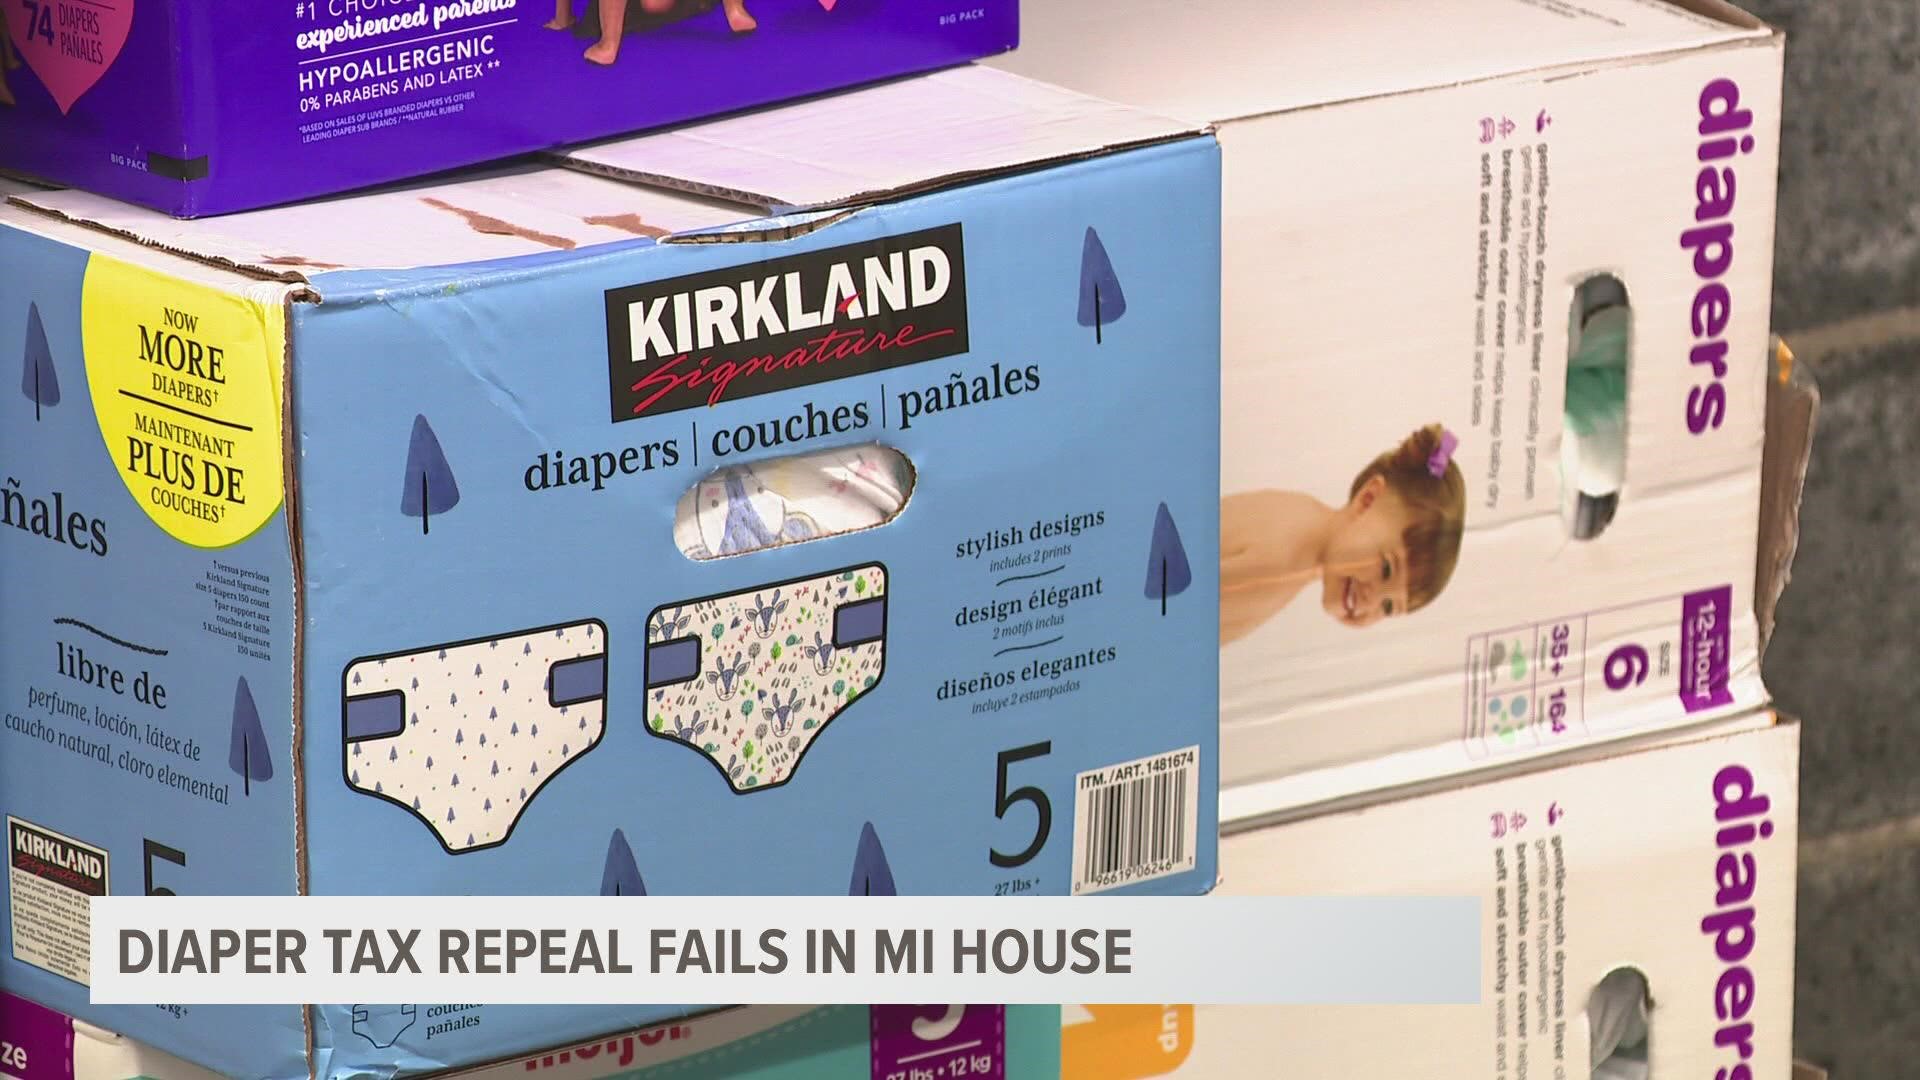 A bill to repeal the tax on diapers in Michigan failed by just a few votes on Wednesday.